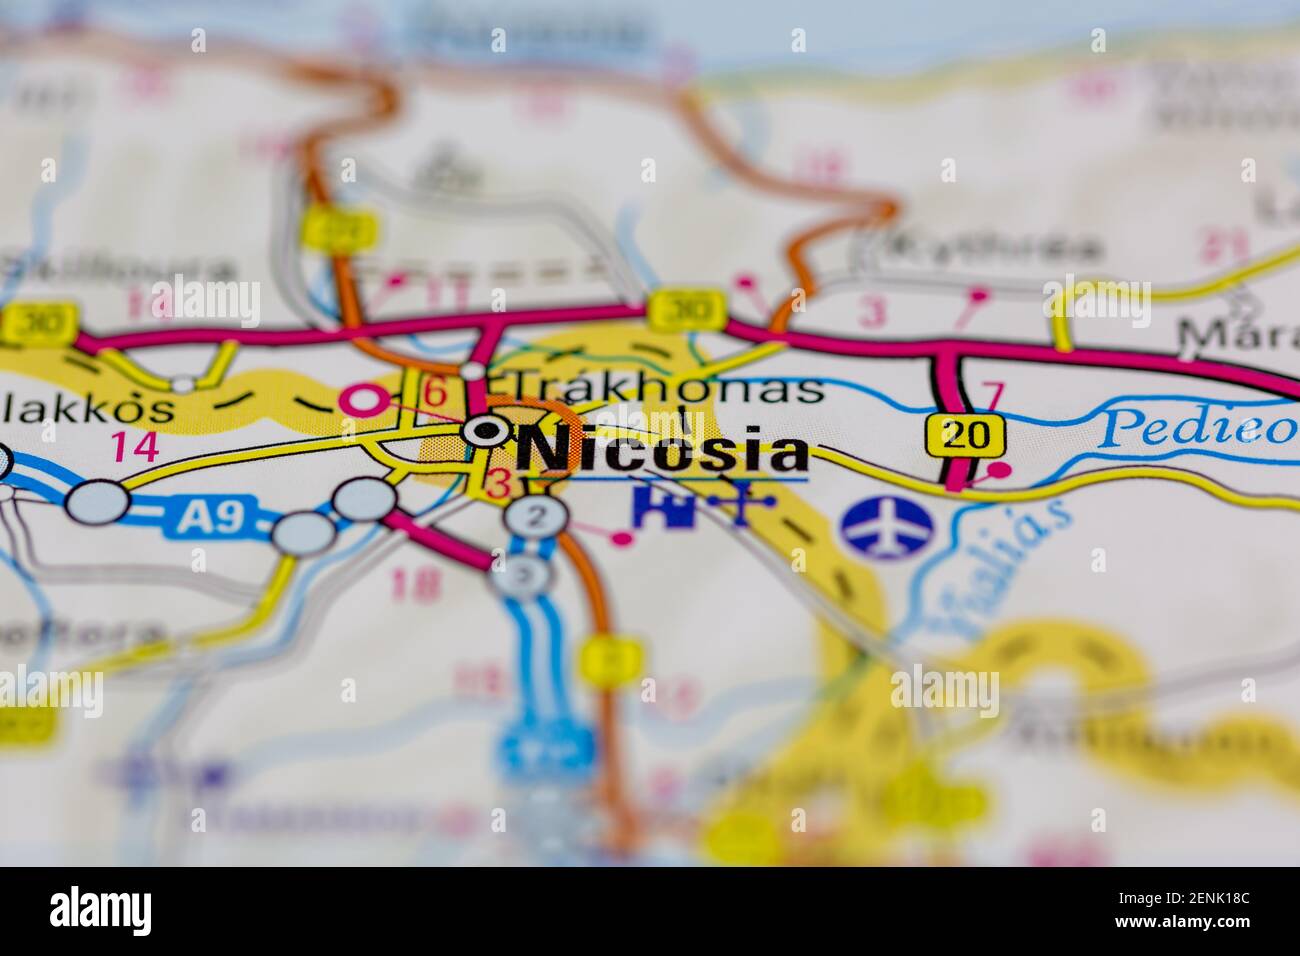 Nicosia Shown On A Road Map Or A Geography Map 2ENK18C 